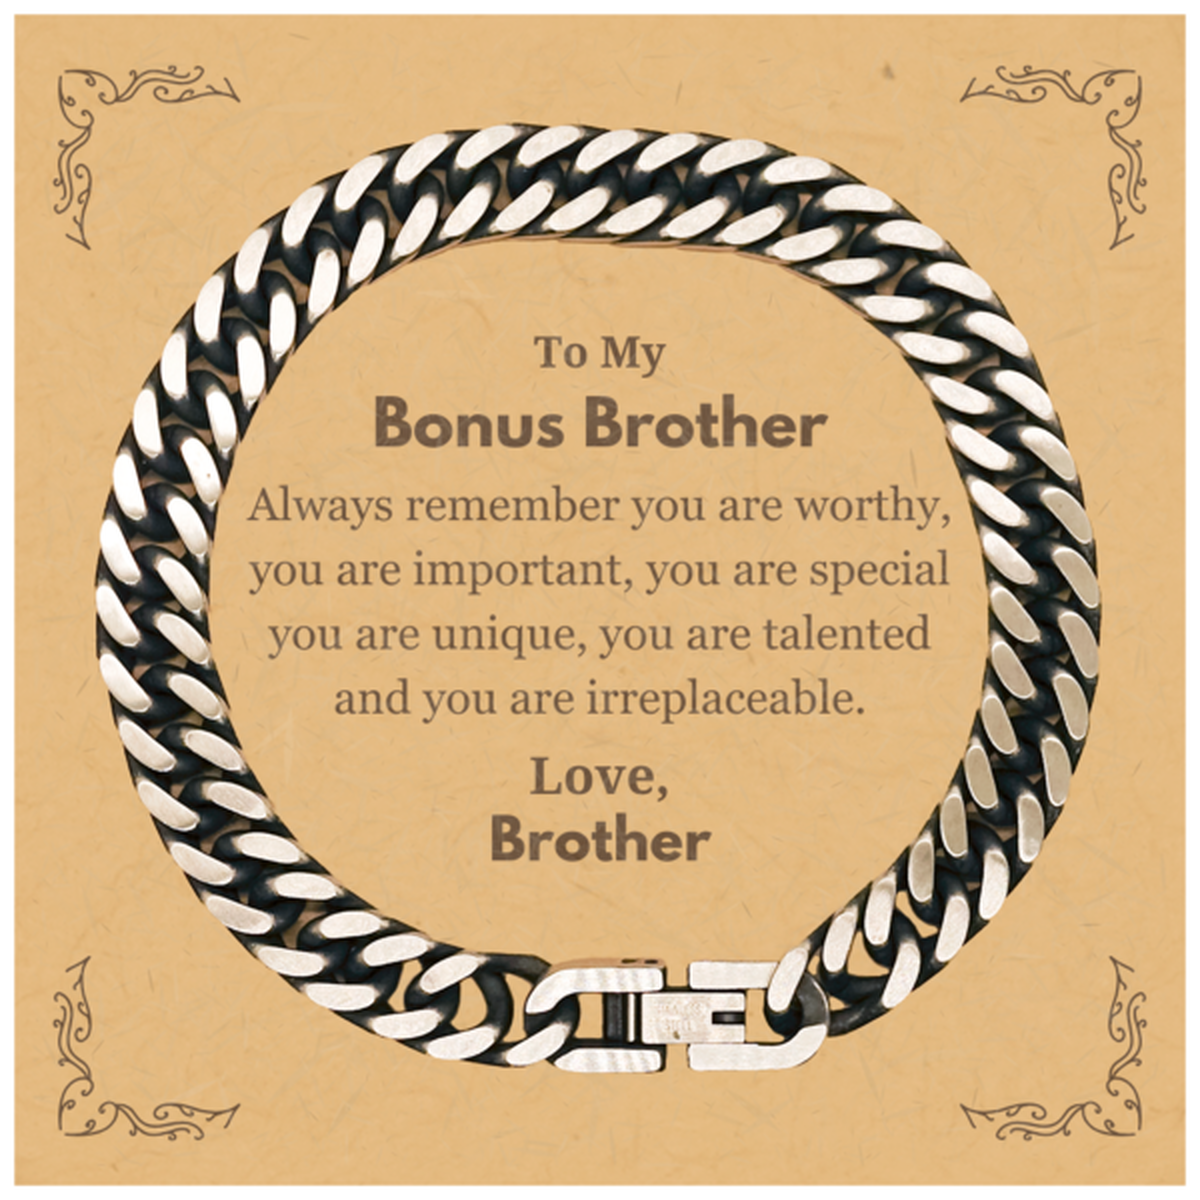 Bonus Brother Birthday Gifts from Brother, Inspirational Cuban Link Chain Bracelet for Bonus Brother Christmas Graduation Gifts for Bonus Brother Always remember you are worthy, you are important. Love, Brother